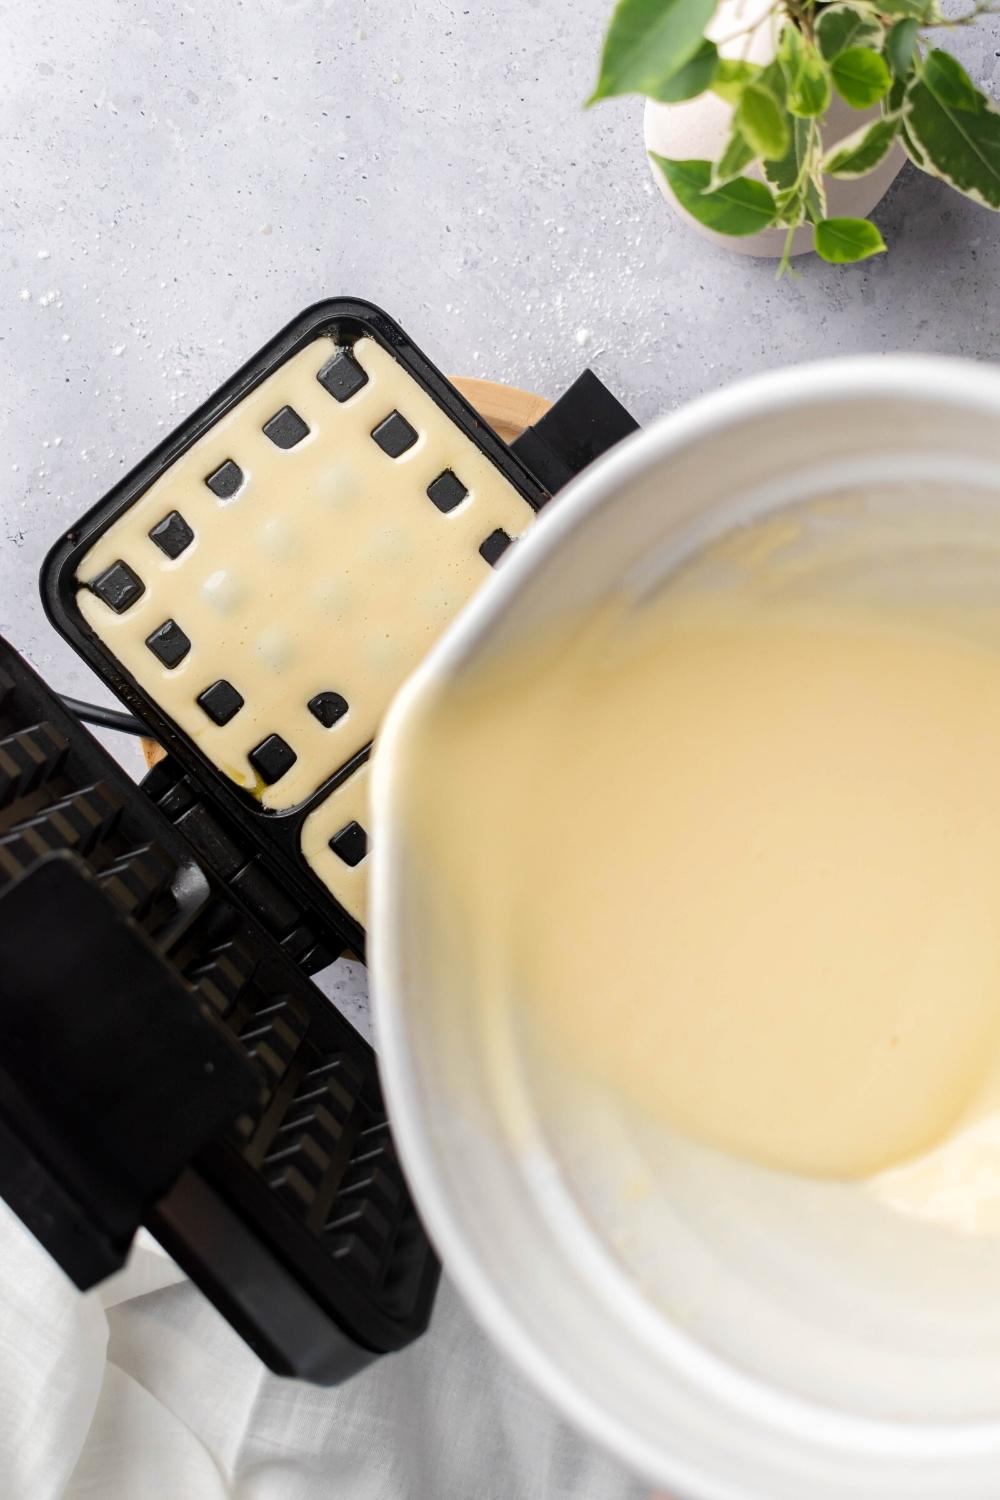 A white bowl with some waffle batter in it pouring some of the batter into an opened waffle iron. The waffle iron is filled with the batter.